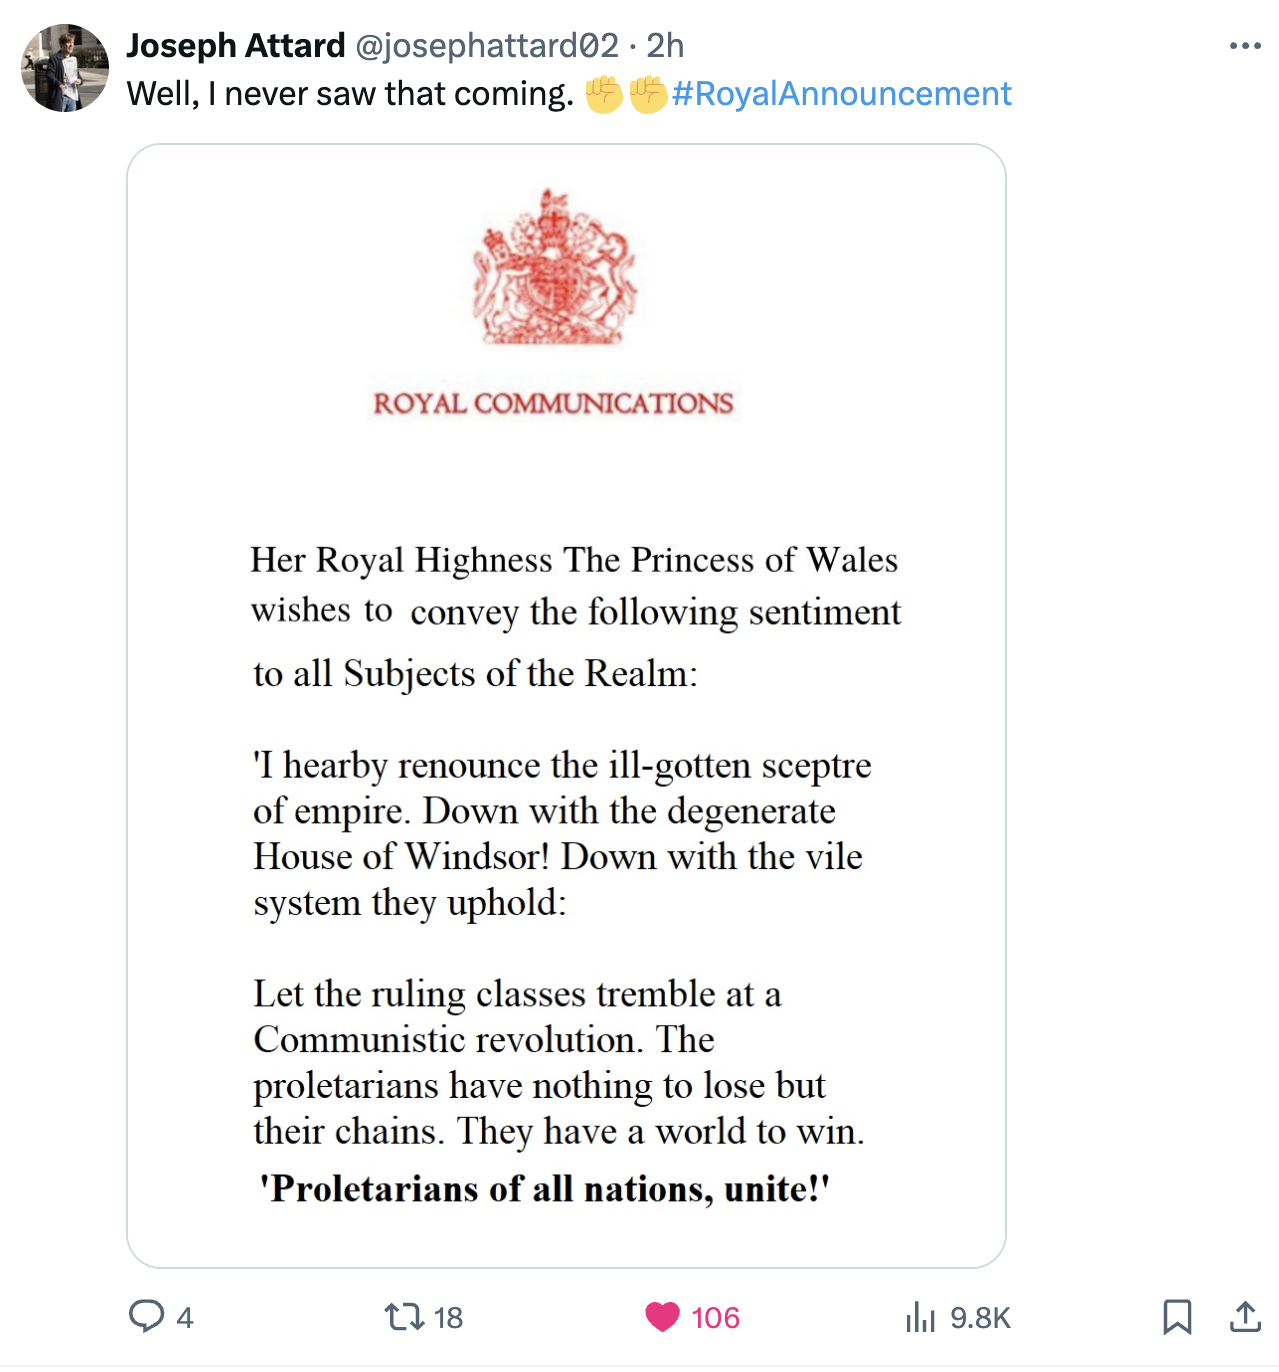 screenshot - Joseph Attard Well, I never saw that coming. Announcement Royal Communications Her Royal Highness The Princess of Wales wishes to convey the ing sentiment to all Subjects of the Realm 'I hearby renounce the illgotten sceptre of empire. Down w